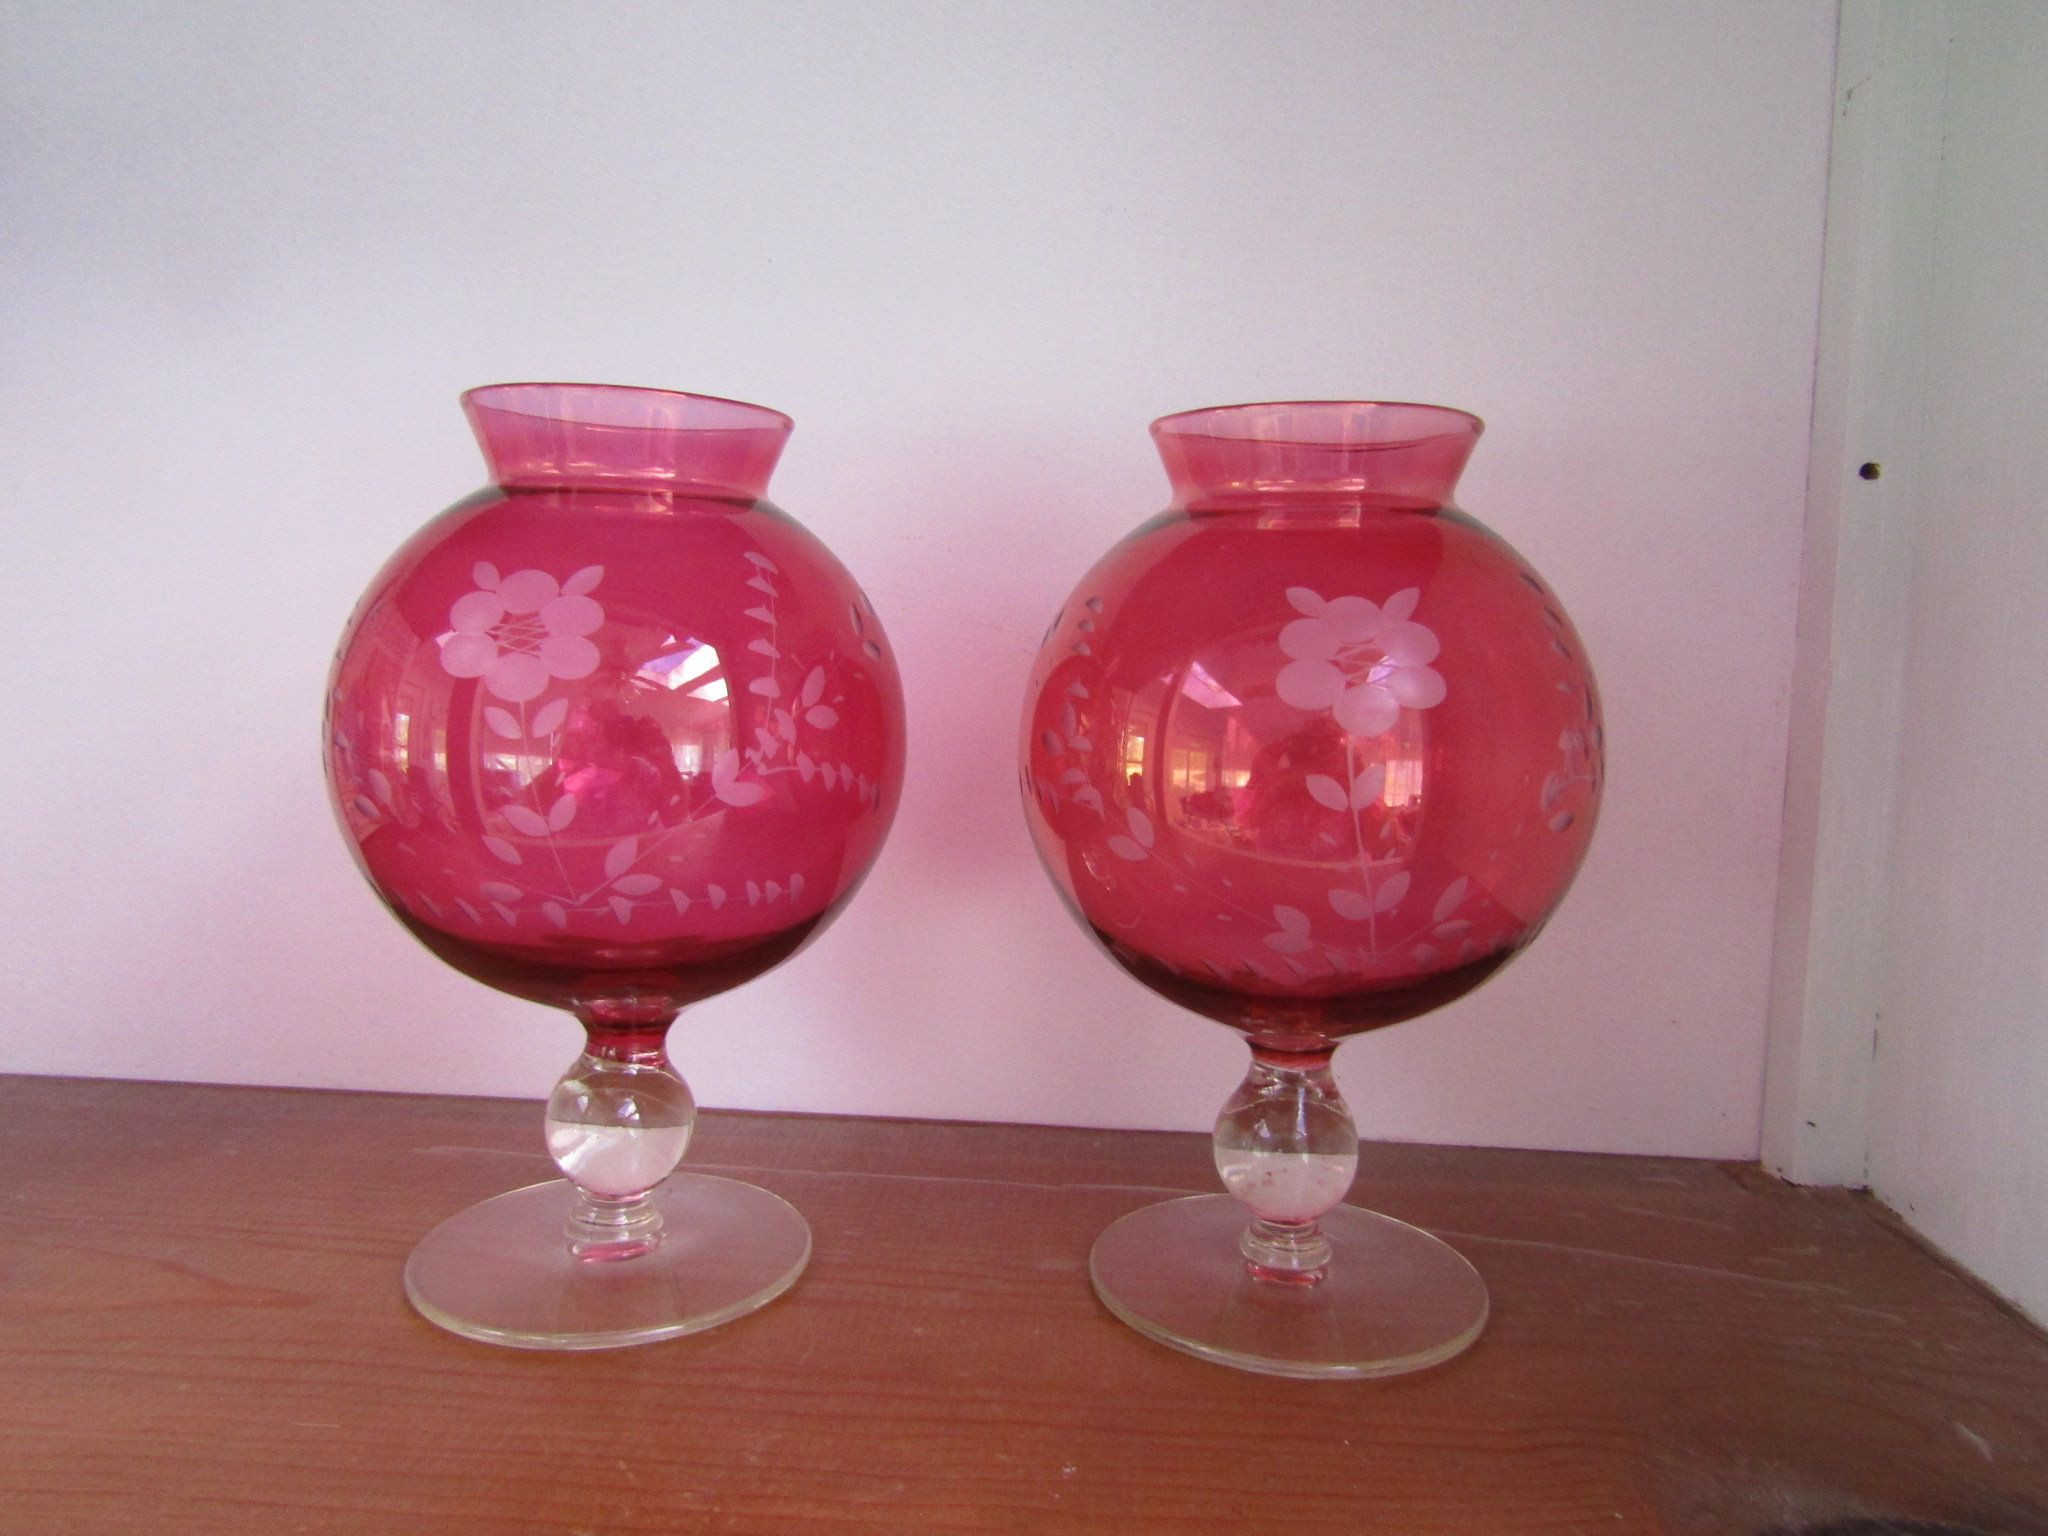 17 Unique Small Vase Set 2024 free download small vase set of hello fall sale cranberry etched glass ball vases set of 2 floral for cranberry etched glass ball vases set of 2 floral etching vintage items